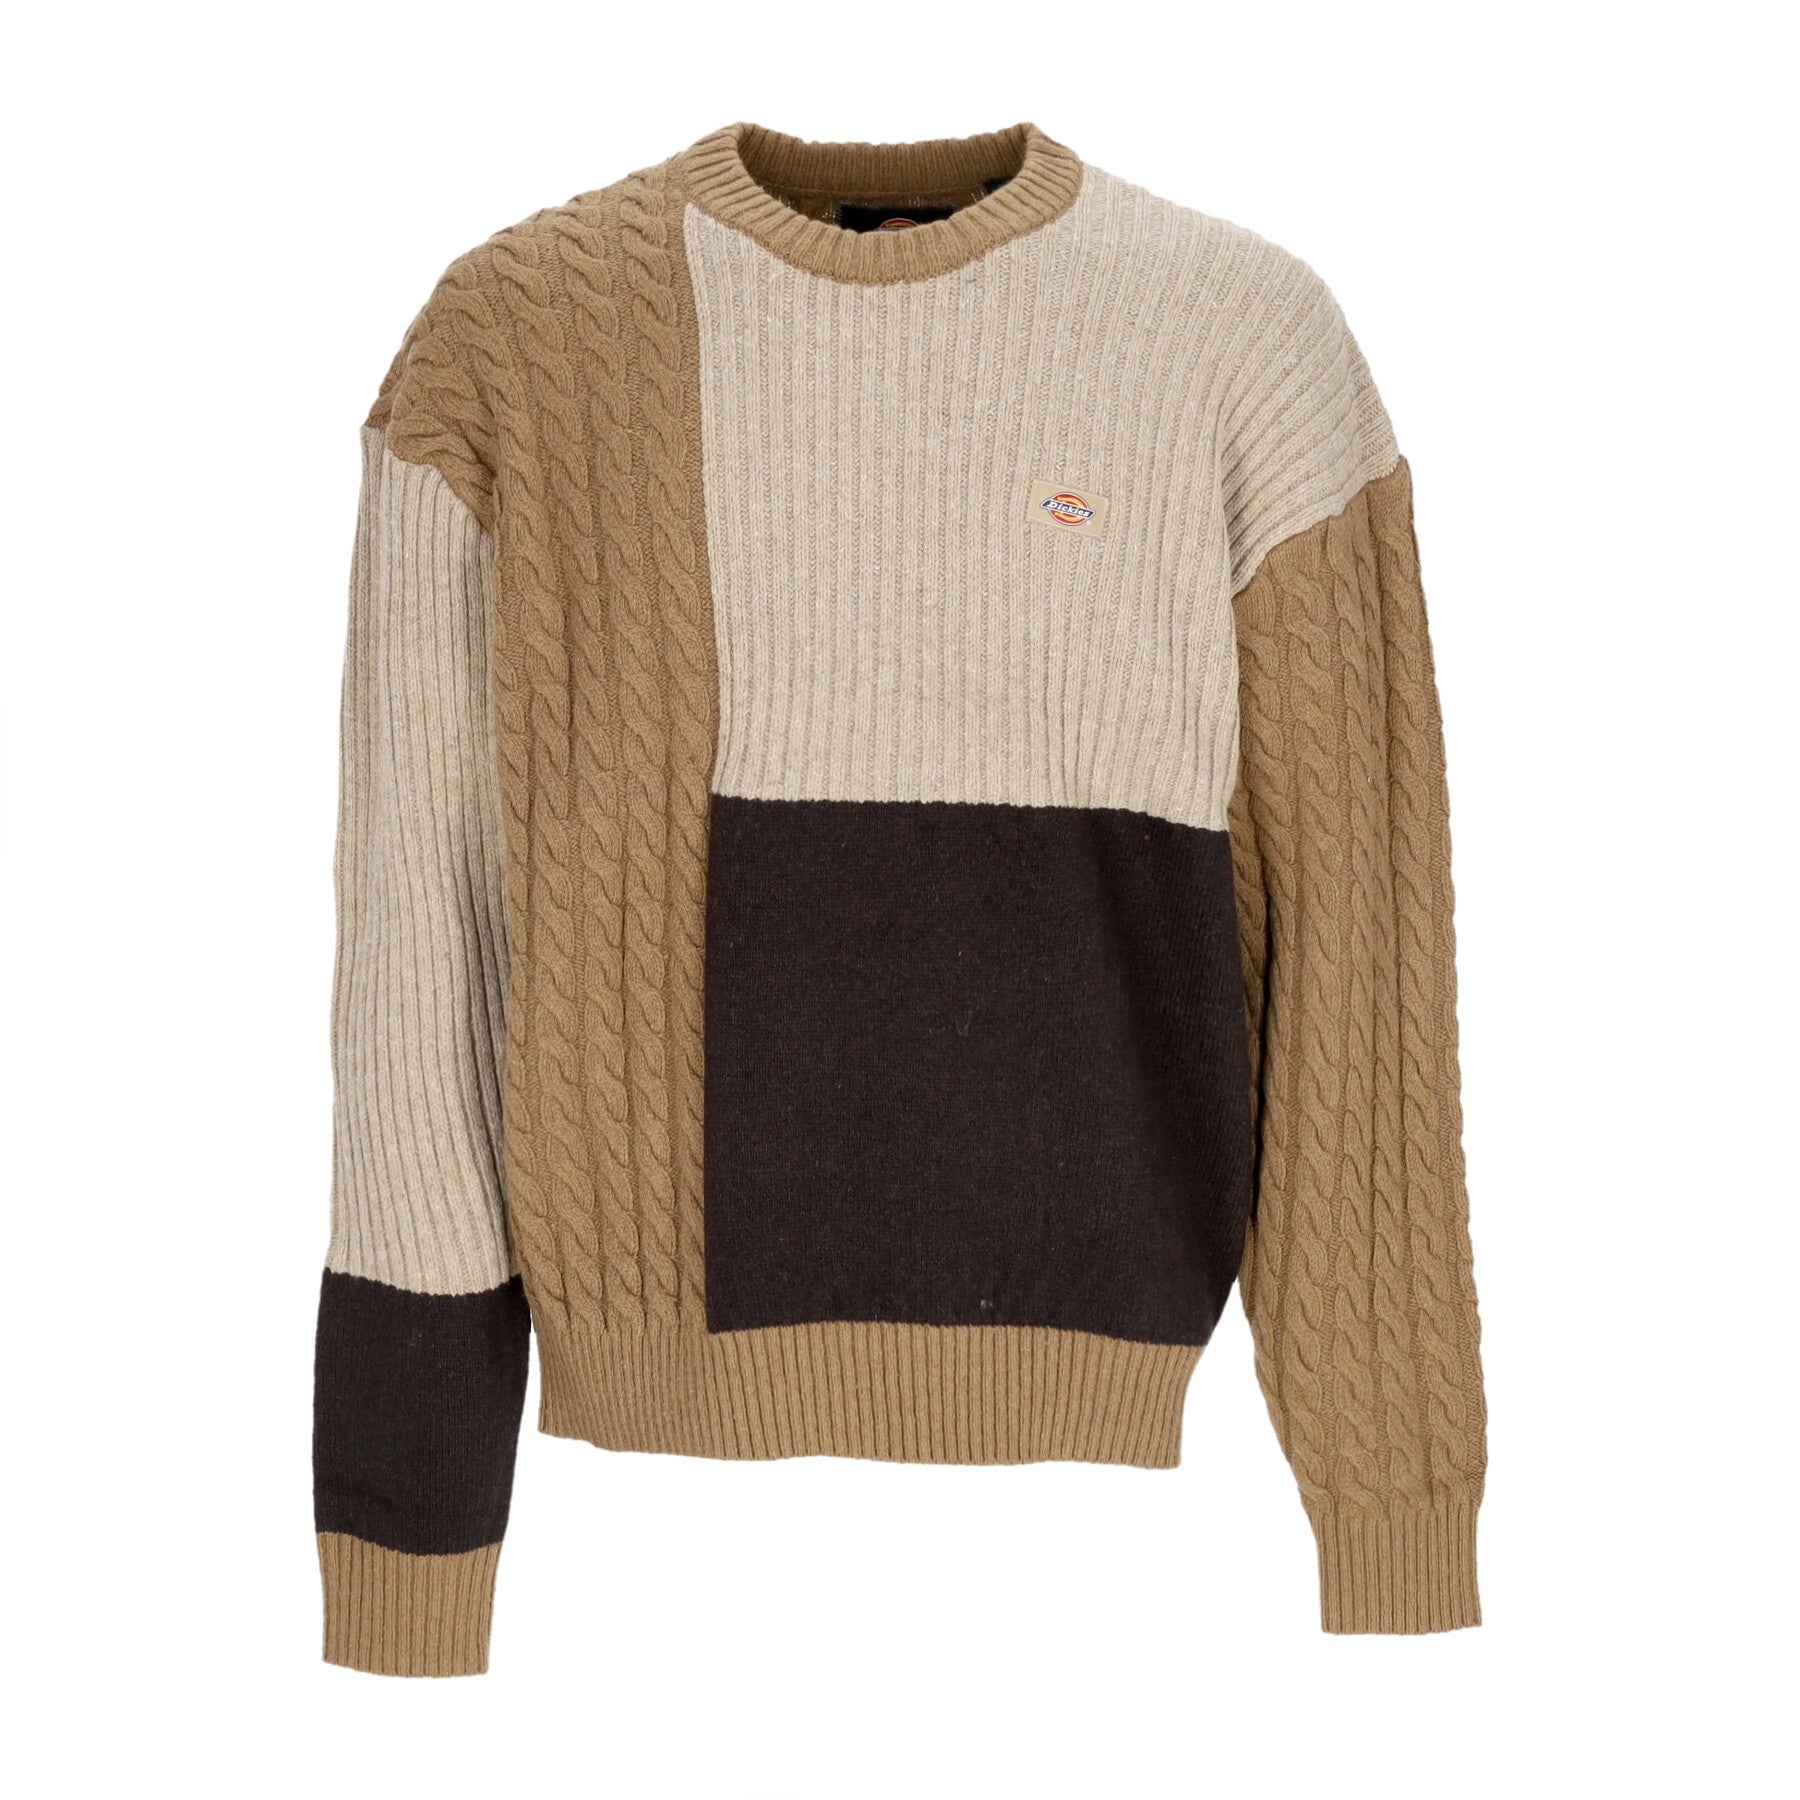 Dickies, Maglione Uomo Lucas Patchwork Sweater, Black